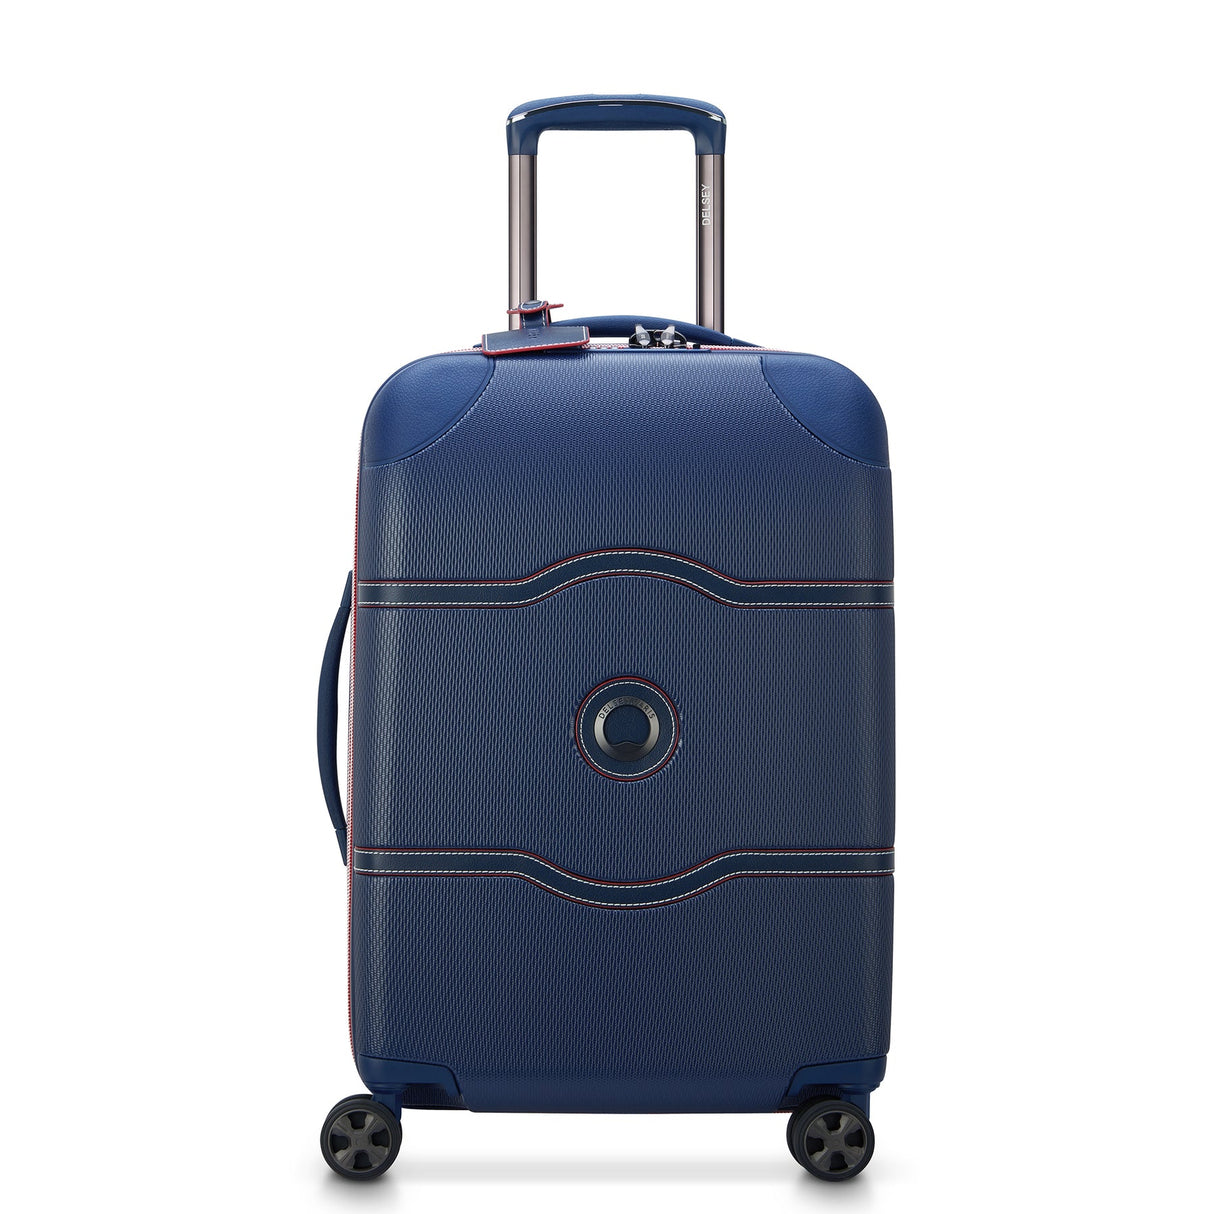 Delsey Chatelet Air 2.0 Carry-On Spinner , Navy Blue , delsey-chatelet-air-2.0-40167680502-01_1800x1800_466602fc-0351-4123-b963-da218cf7ab56